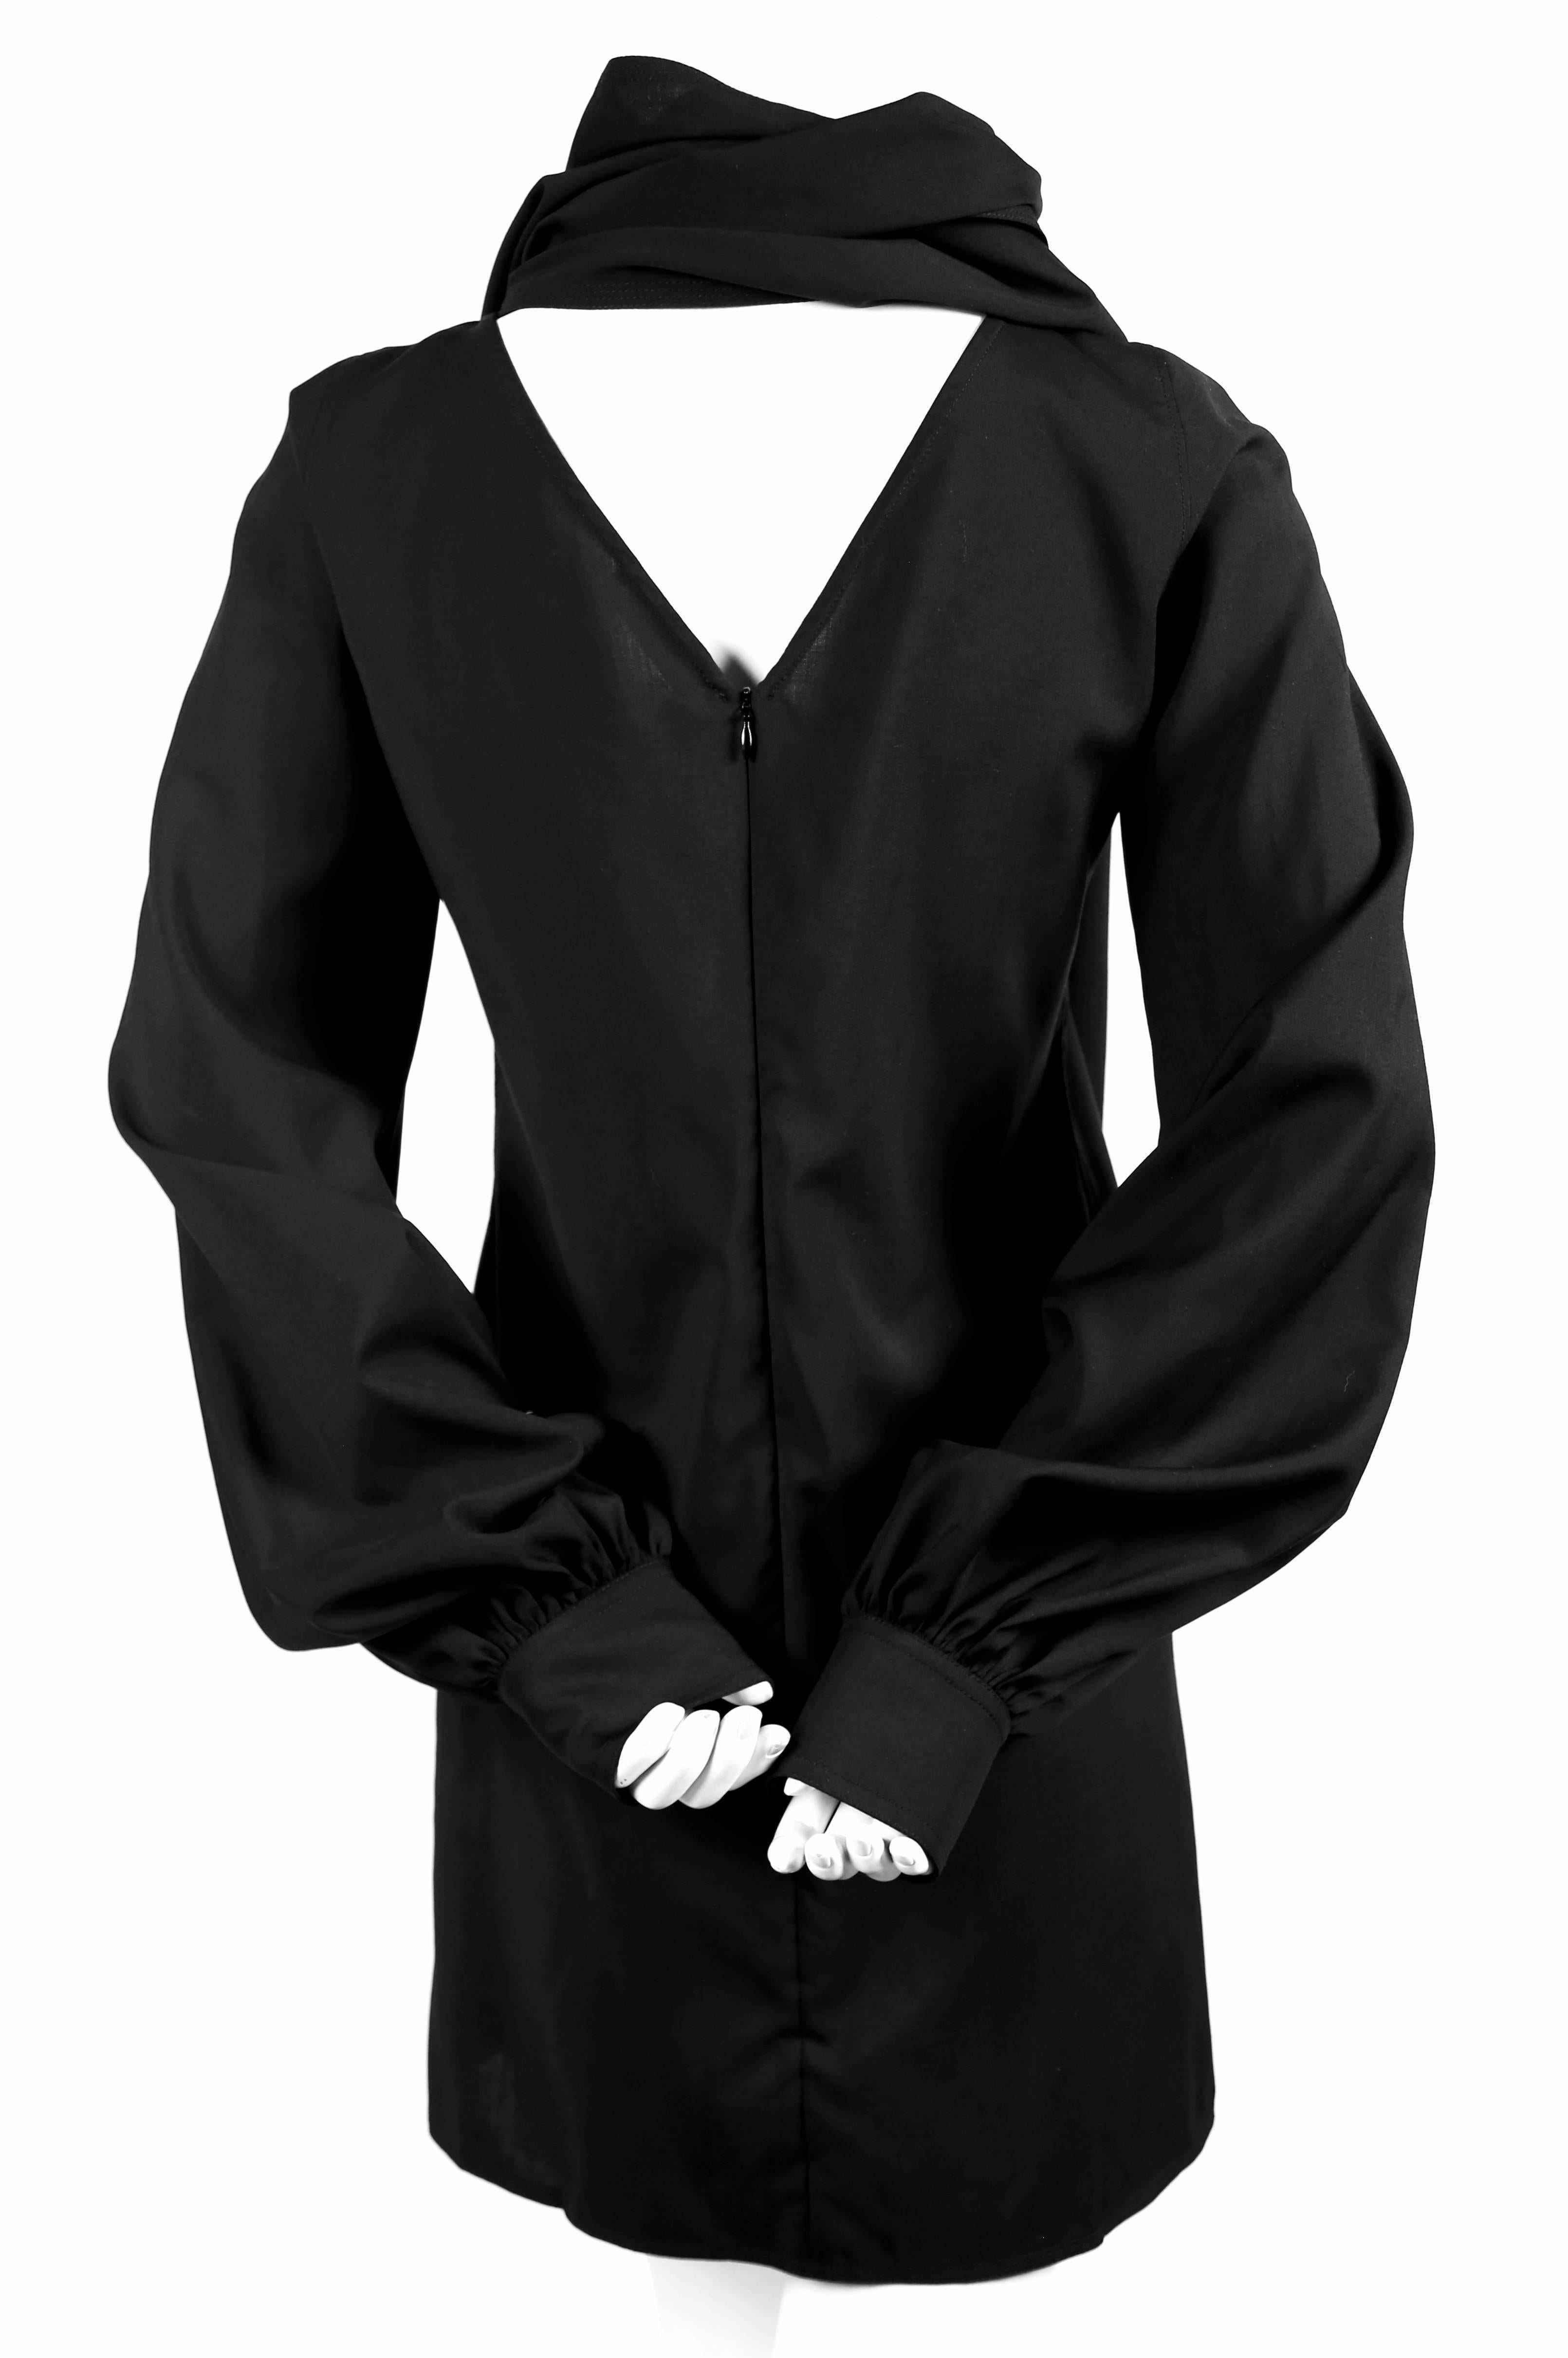 Women's Celine by Phoebe Philo runway tunic dress with neck ties and open back